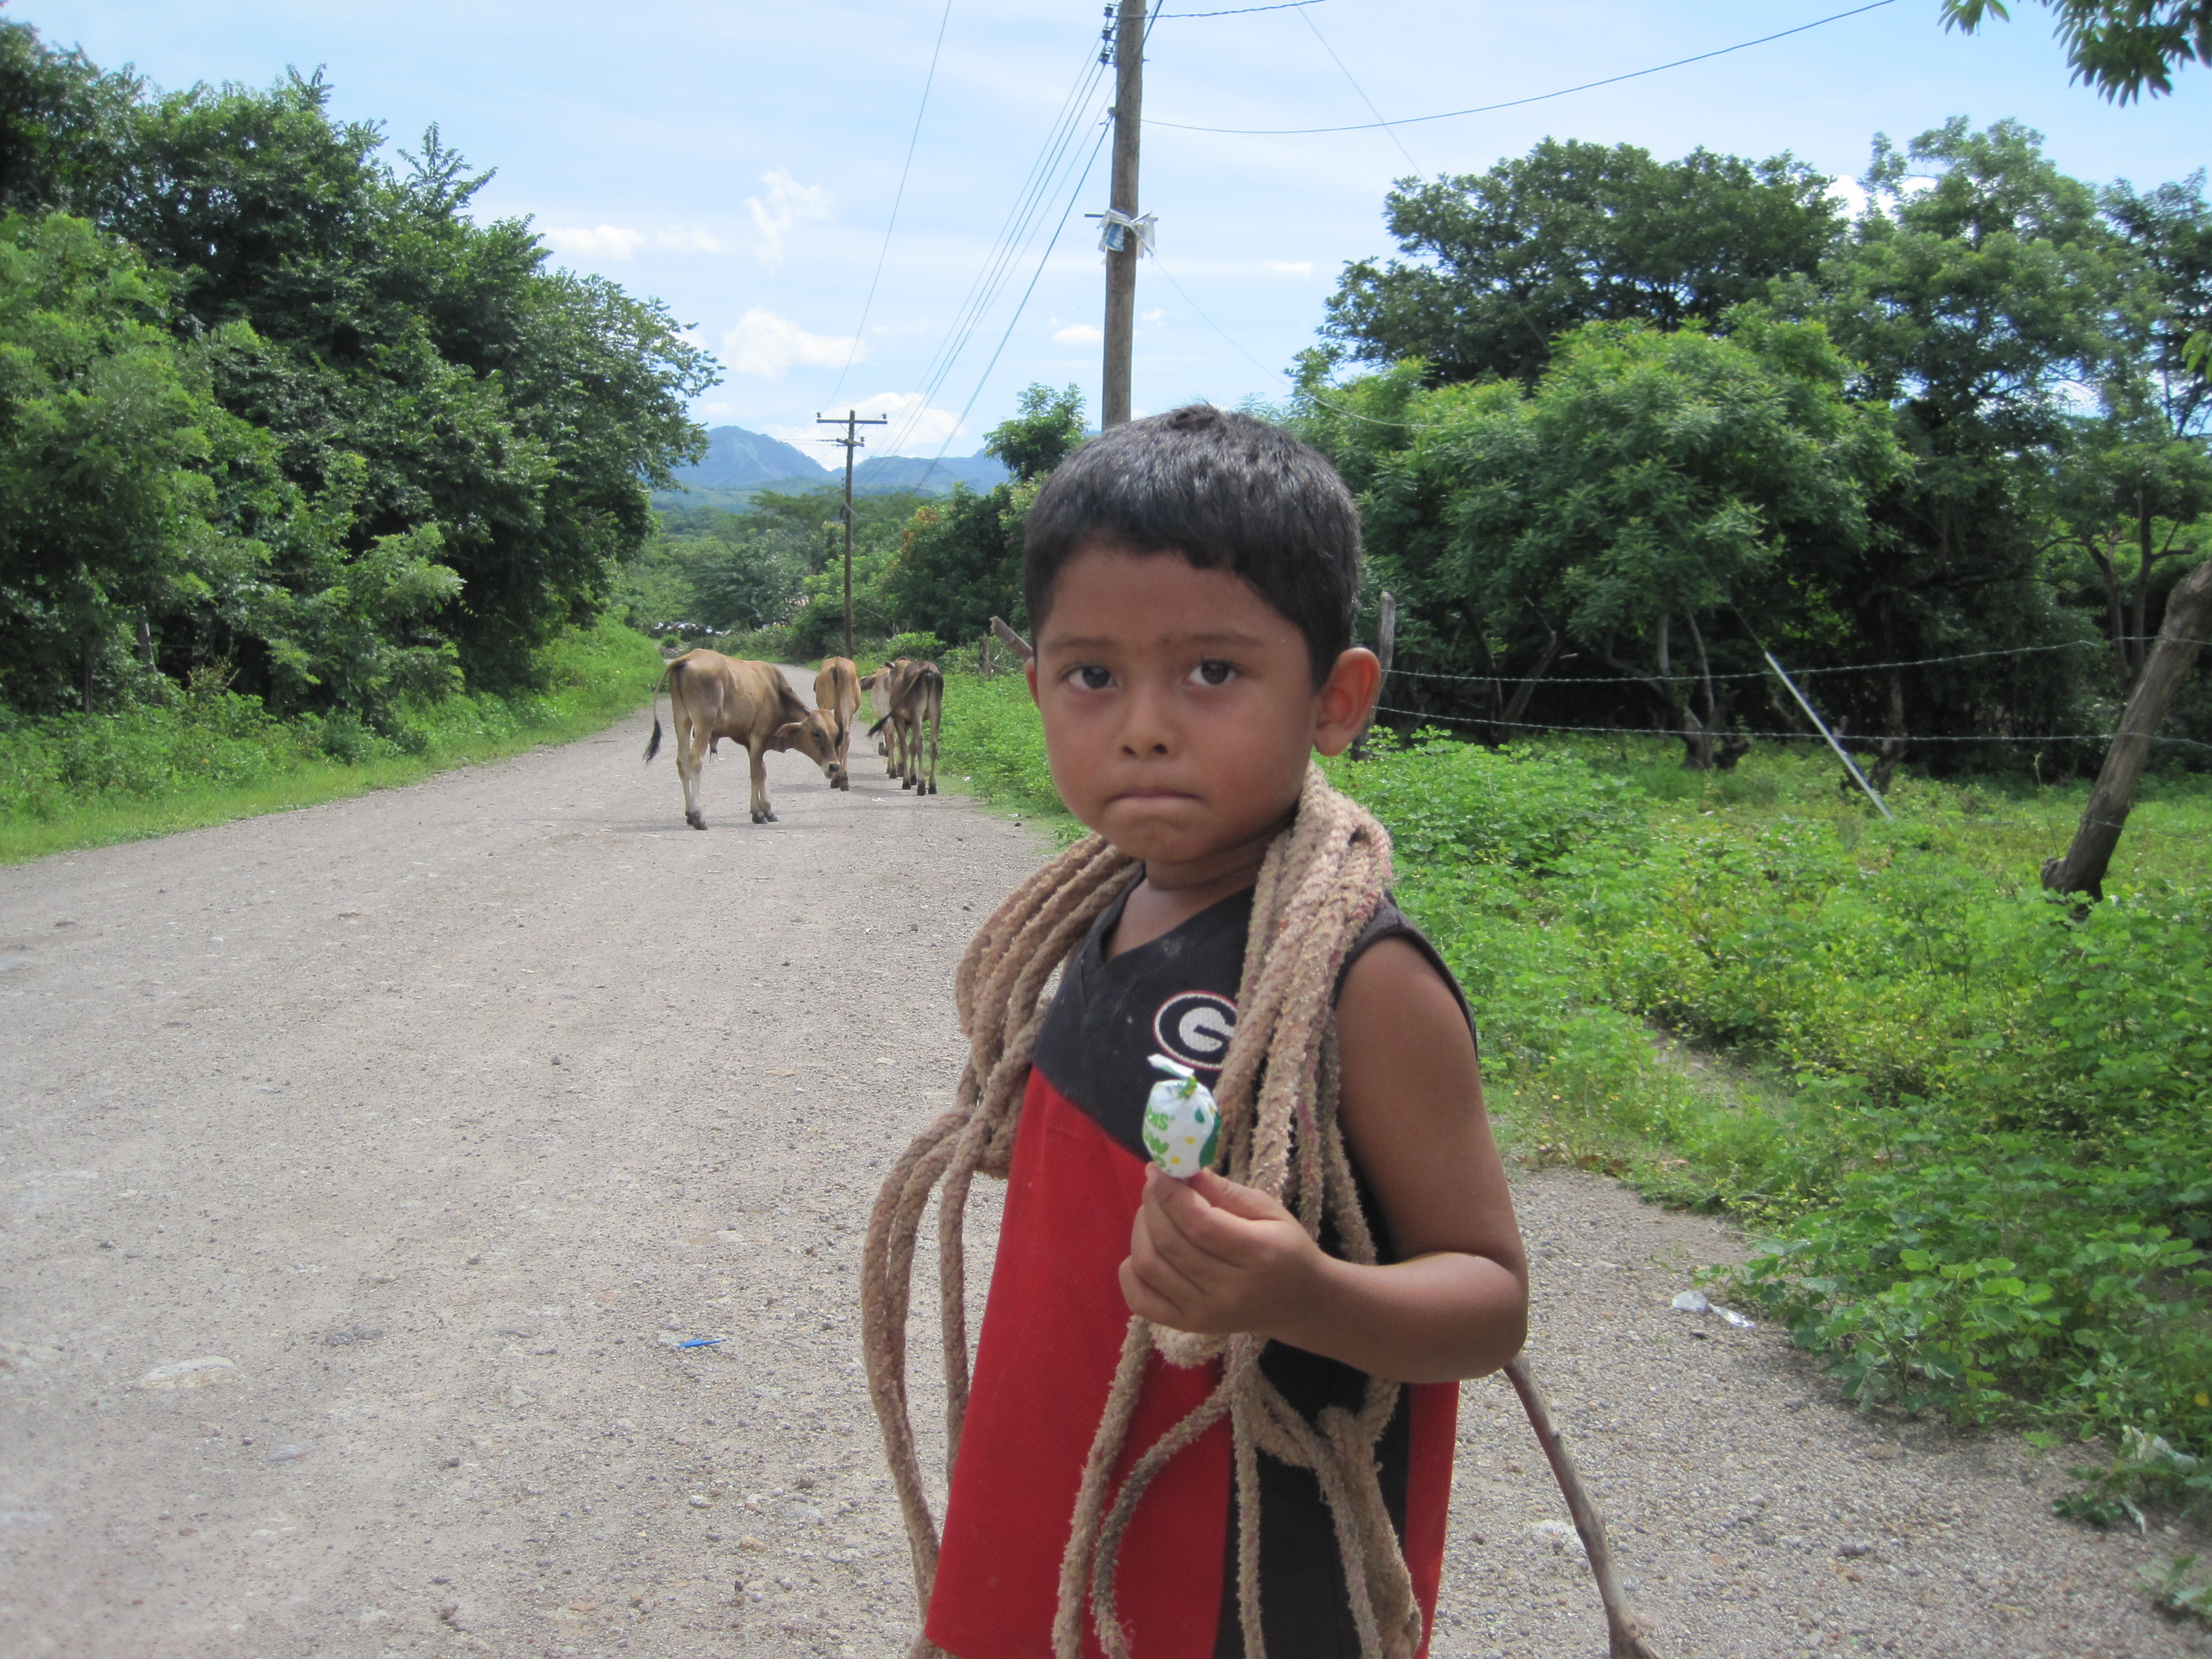 Boy herds his cows, kids in this part of Honduras get responsibilities at a very young age